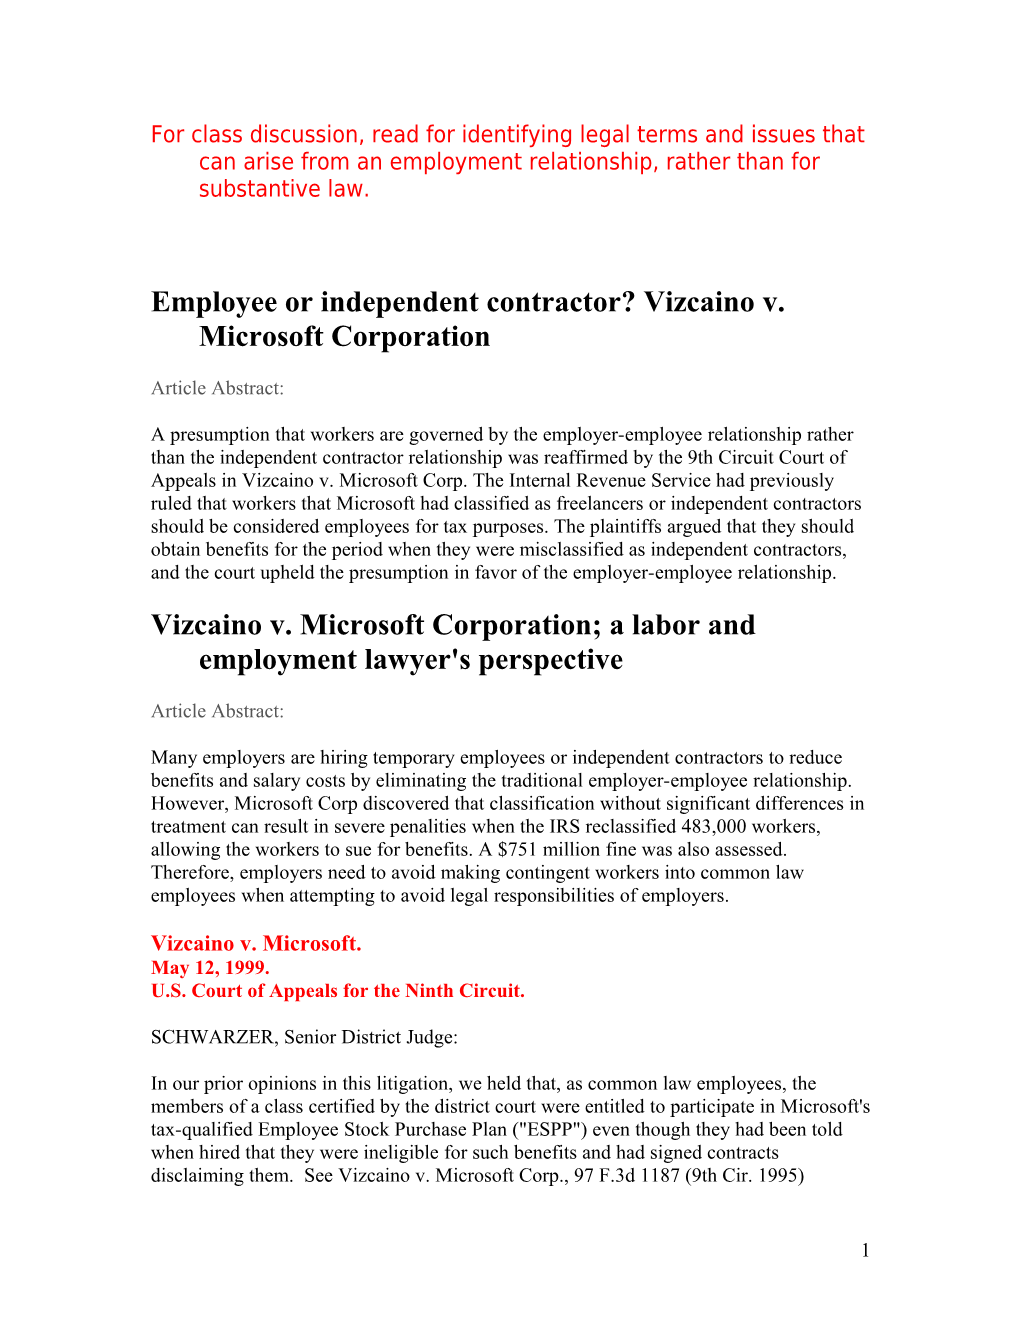 Employee Or Independent Contractor? Vizcaino V. Microsoft Corporation